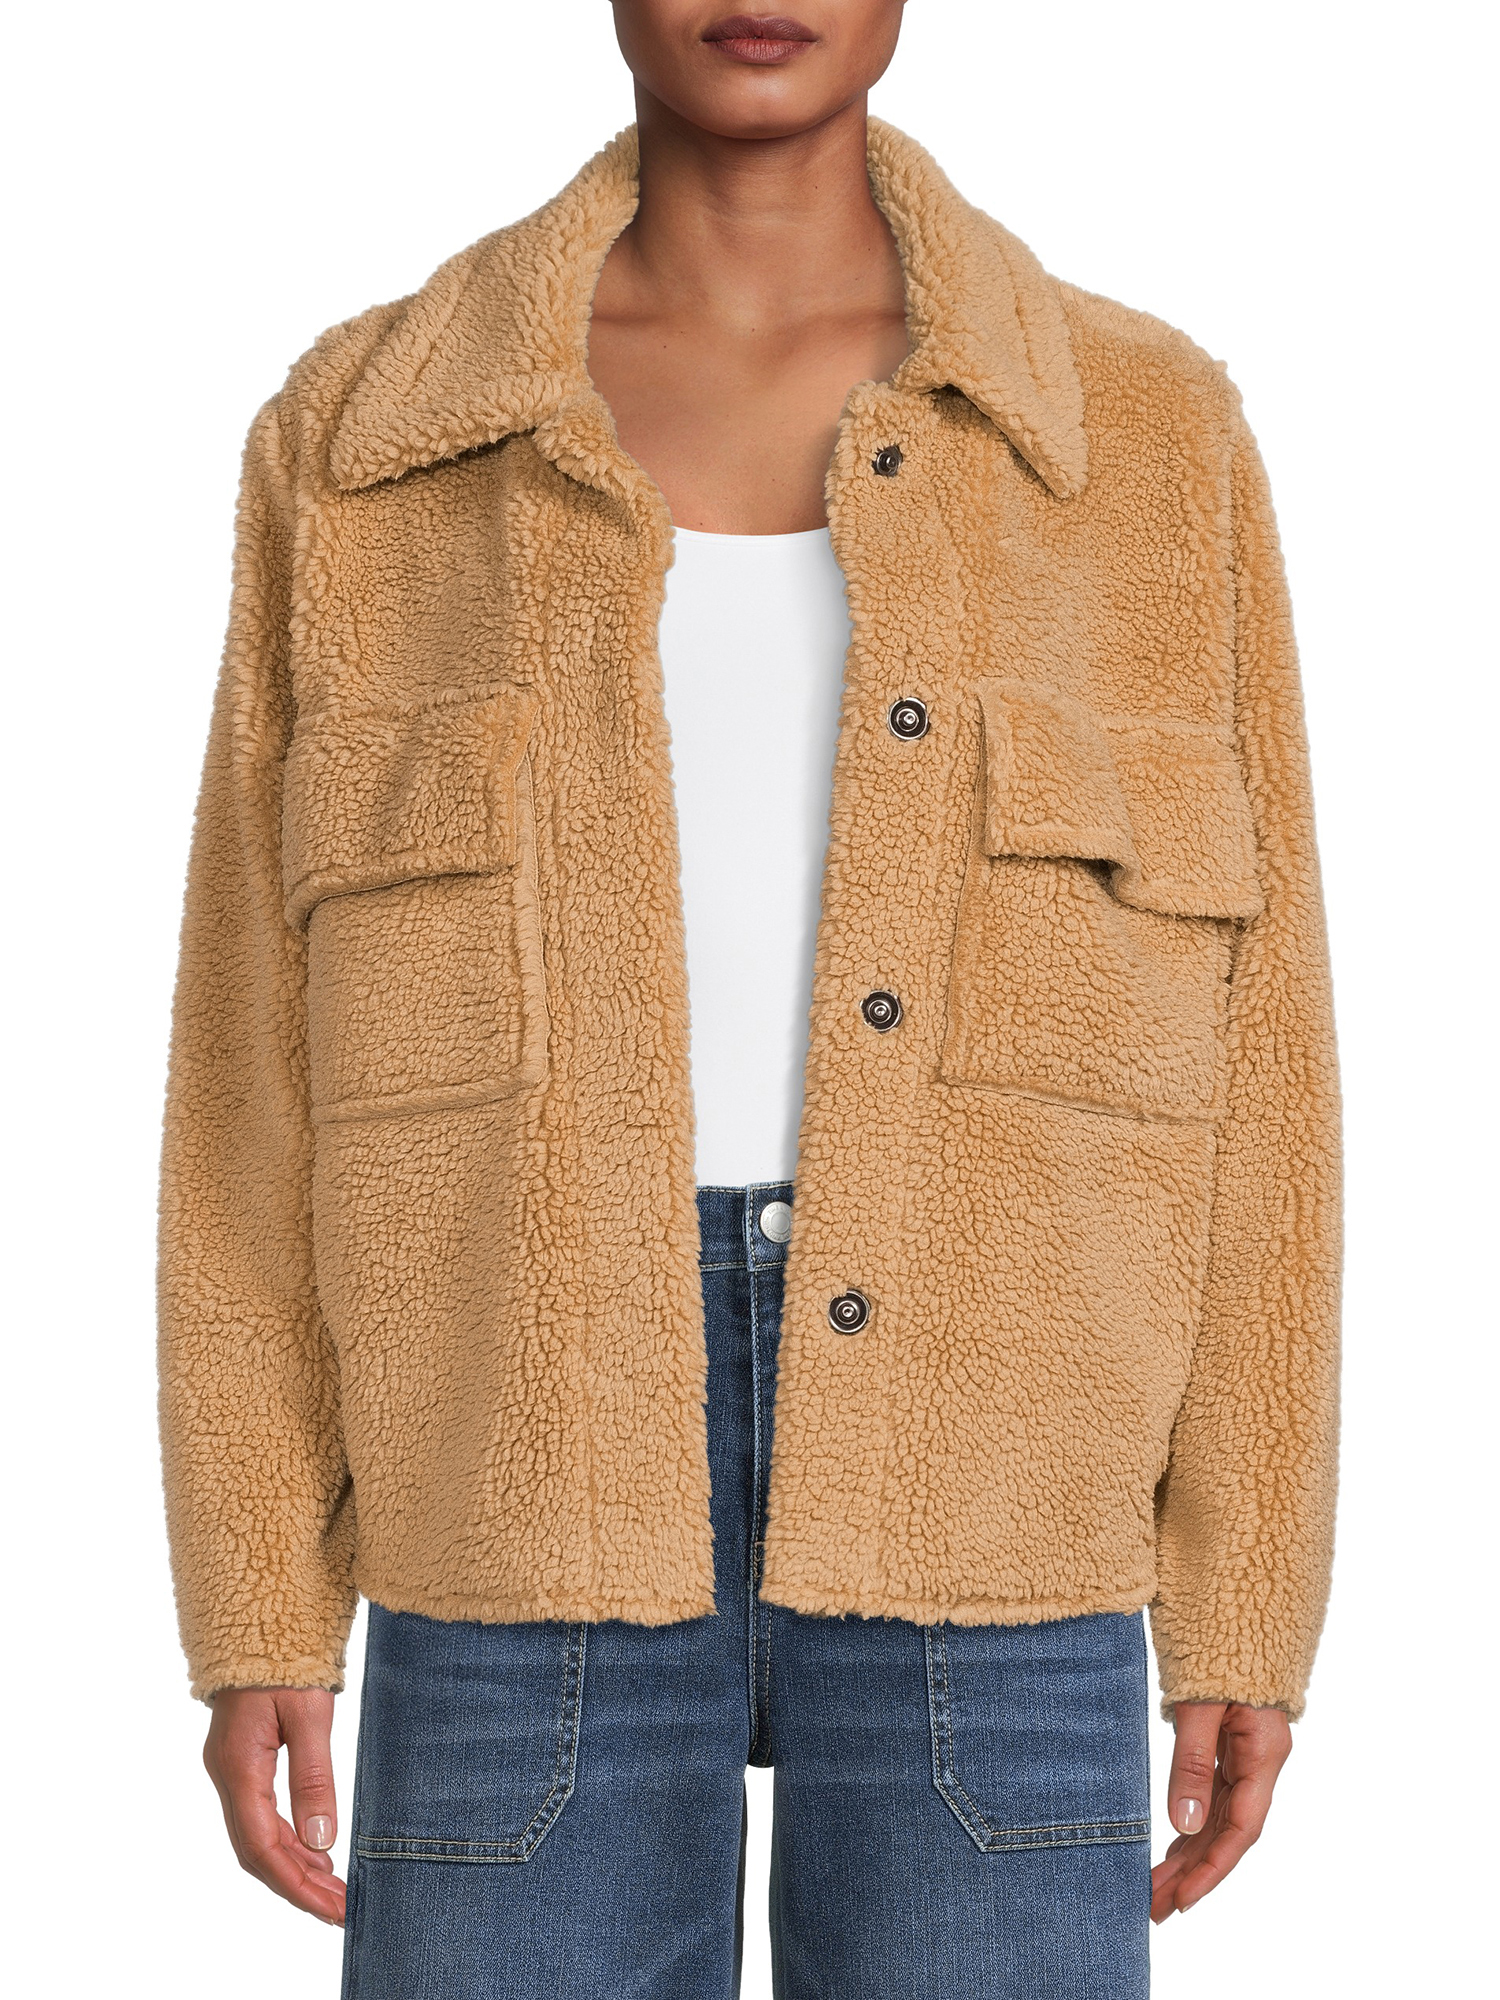 Time and Tru Women's Sherpa Jacket - image 1 of 5